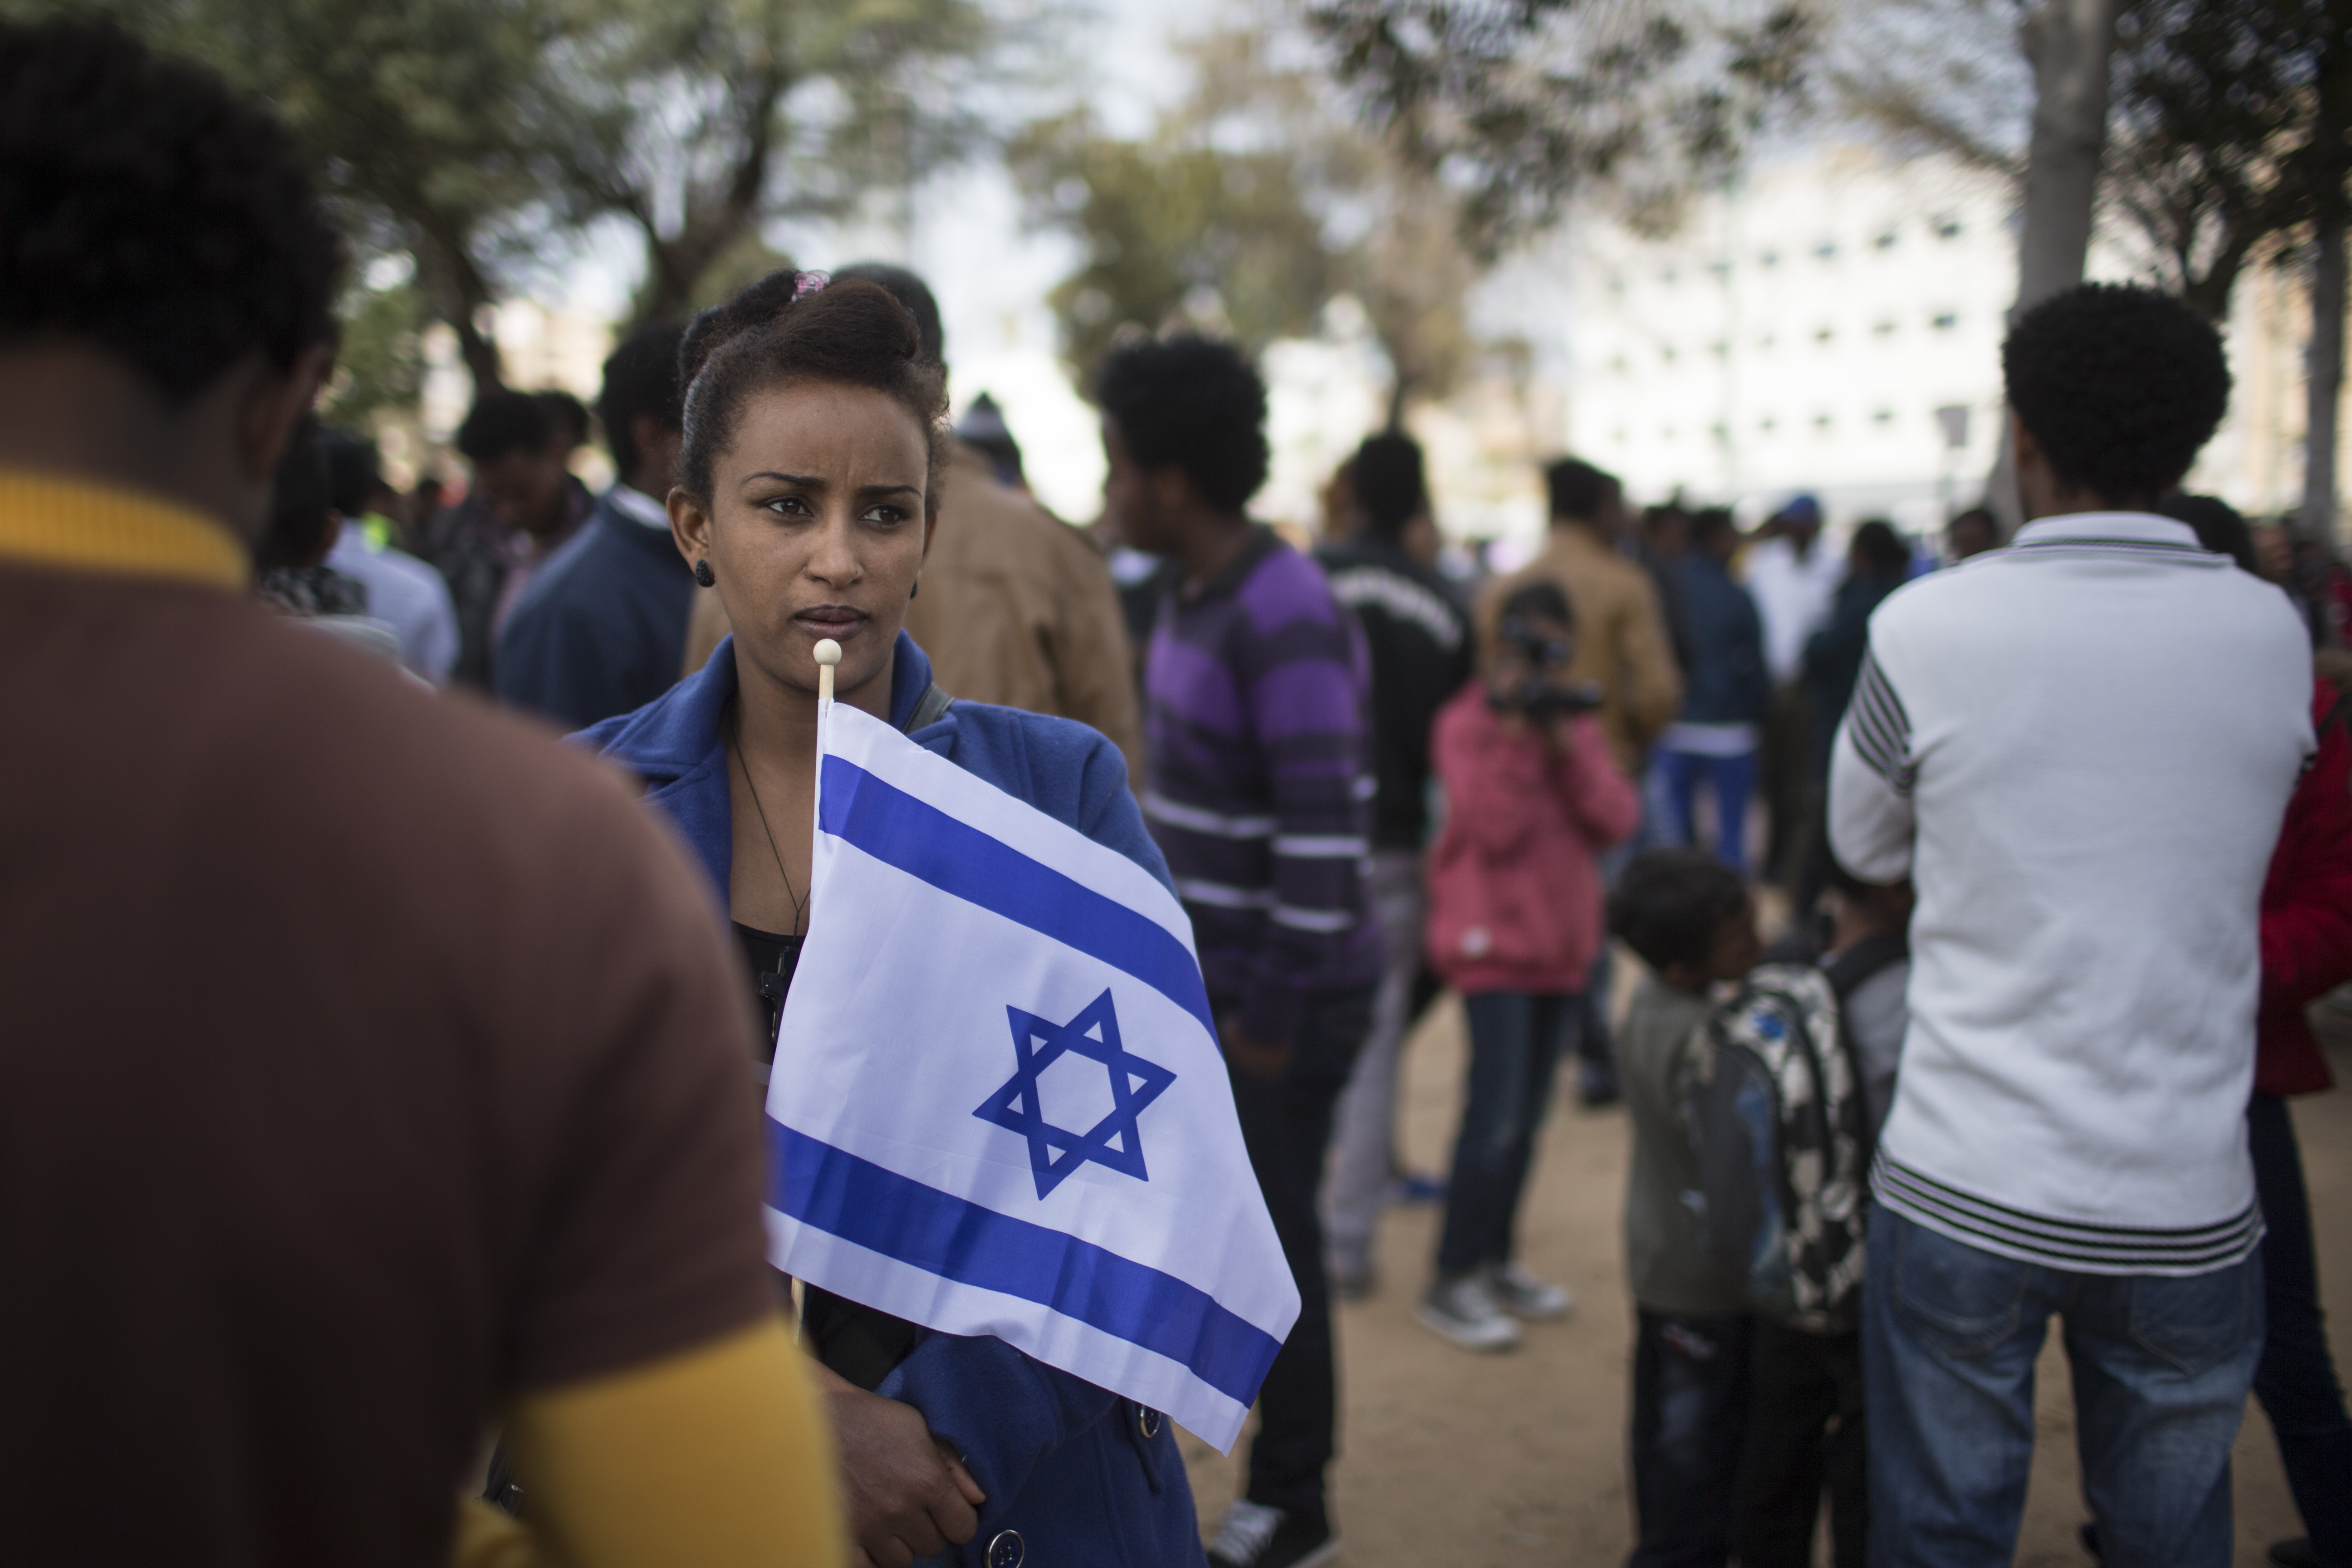 An African woman holds an Israeli flag as thousands of African migrants take part in a rally on January 7, 2014 in Tel Aviv, Israel. Tens of thousands of African asylum seekers are protesting against a law allowing authorities to keep them in open-ended detention until the resolution of their asylum requests are granted, they are deported or they volunteer to leave the country. 